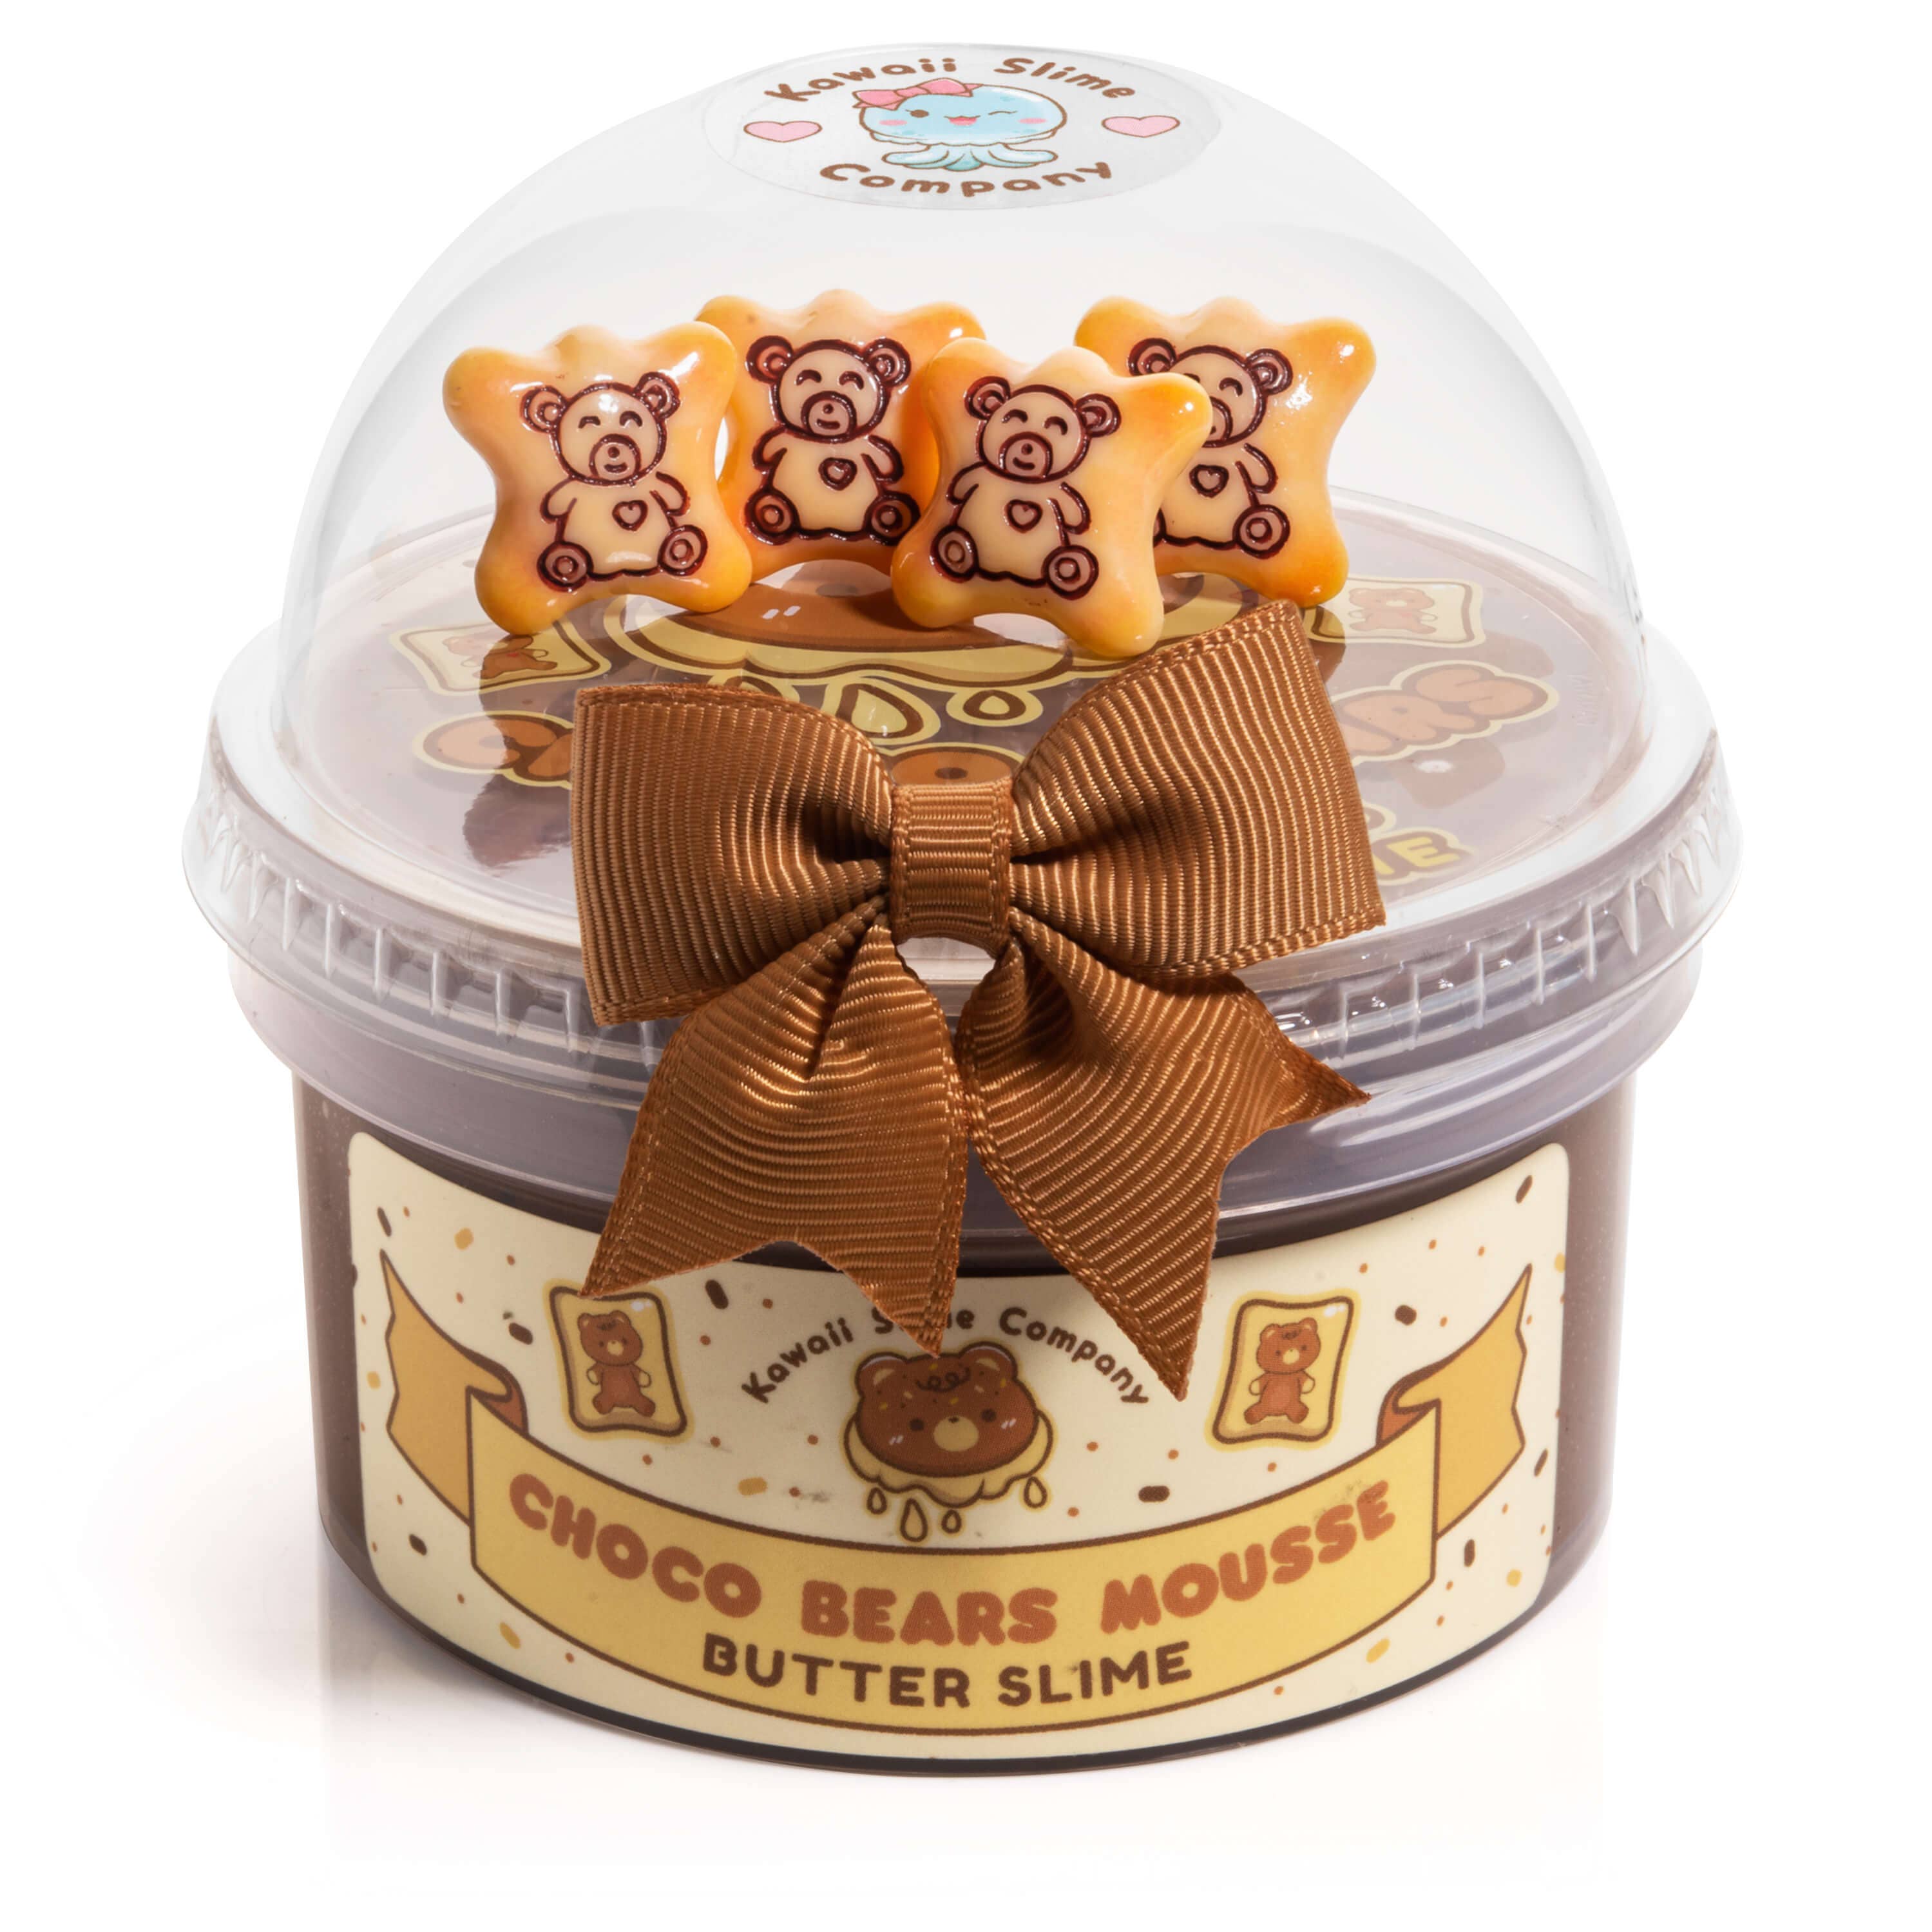 Choco Bears Mousse Butter Slime – Flying Pig Toys